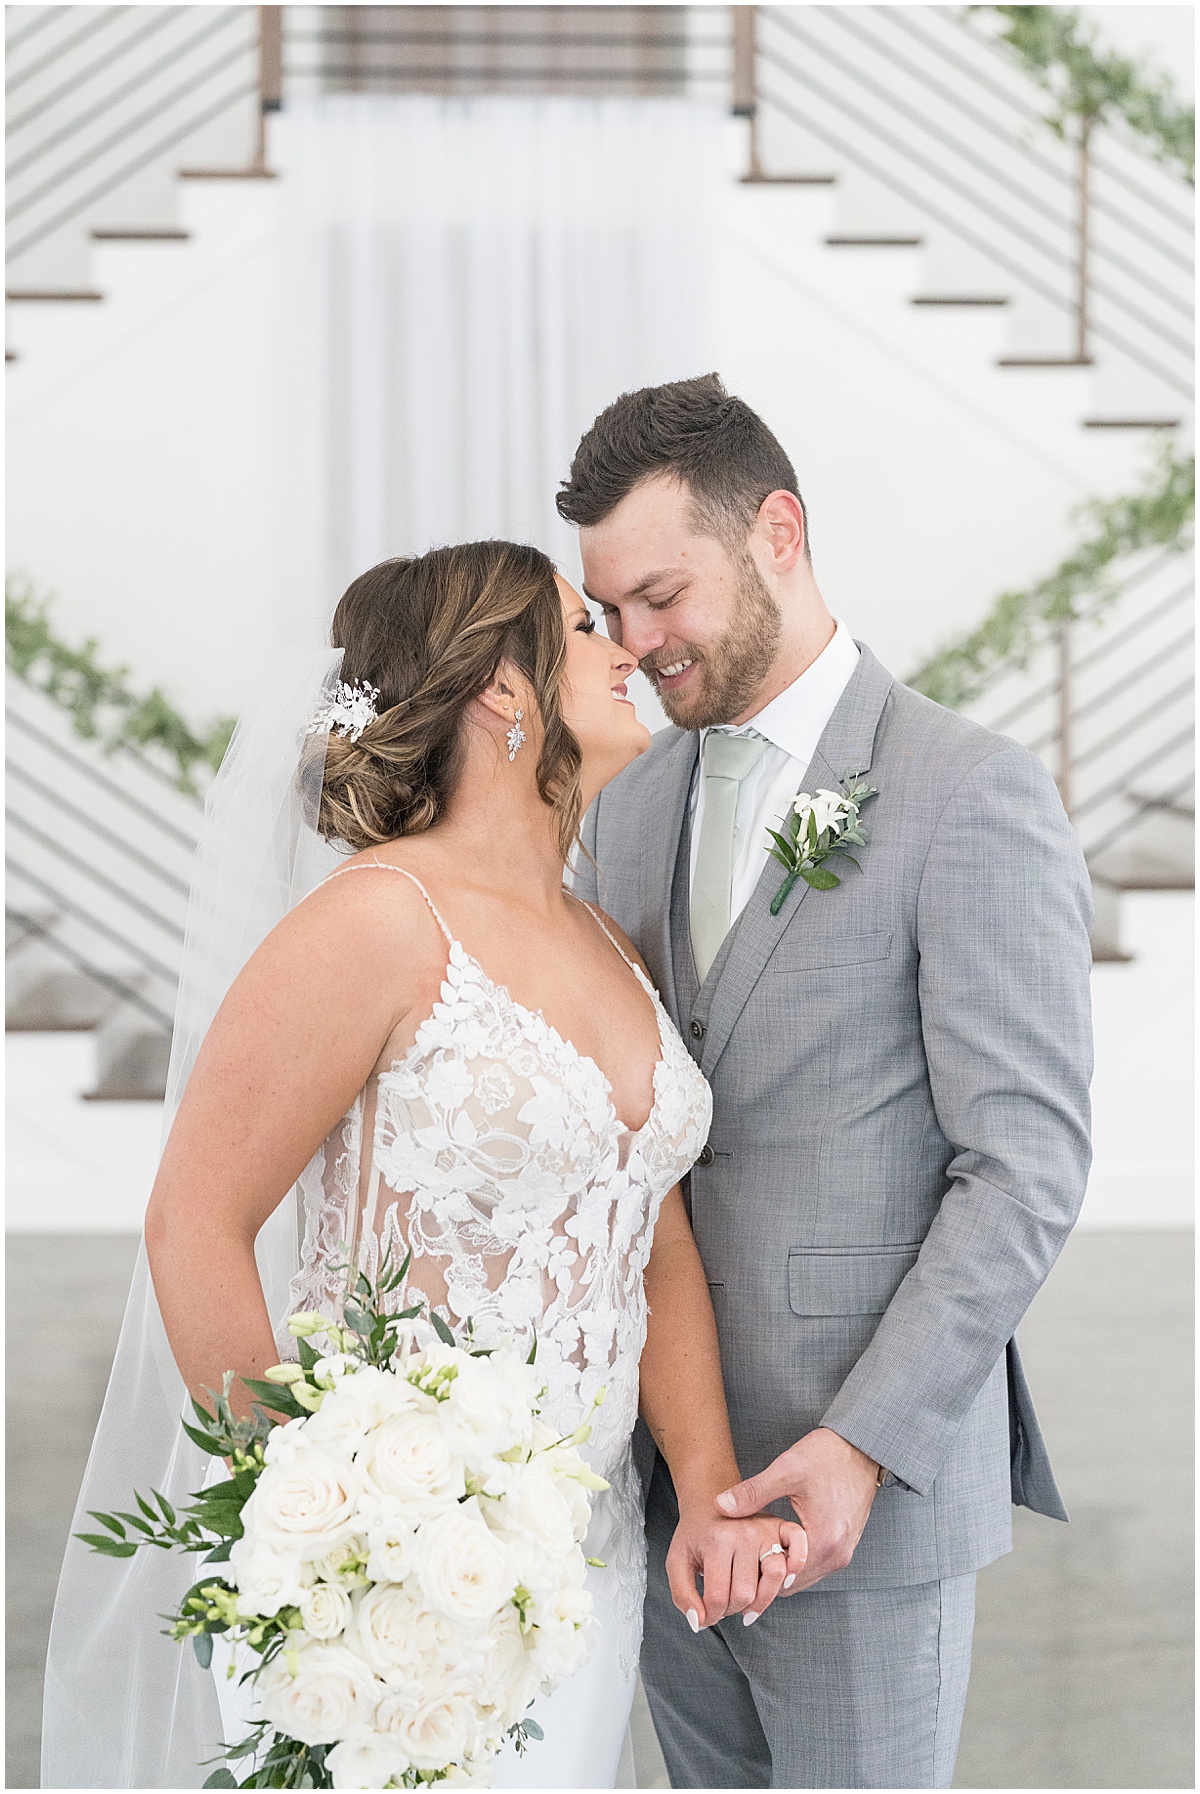 Bride and groom kiss in front of staircase at wedding at New Journey Farms in Lafayette, Indiana photographed by Victoria Rayburn Photography